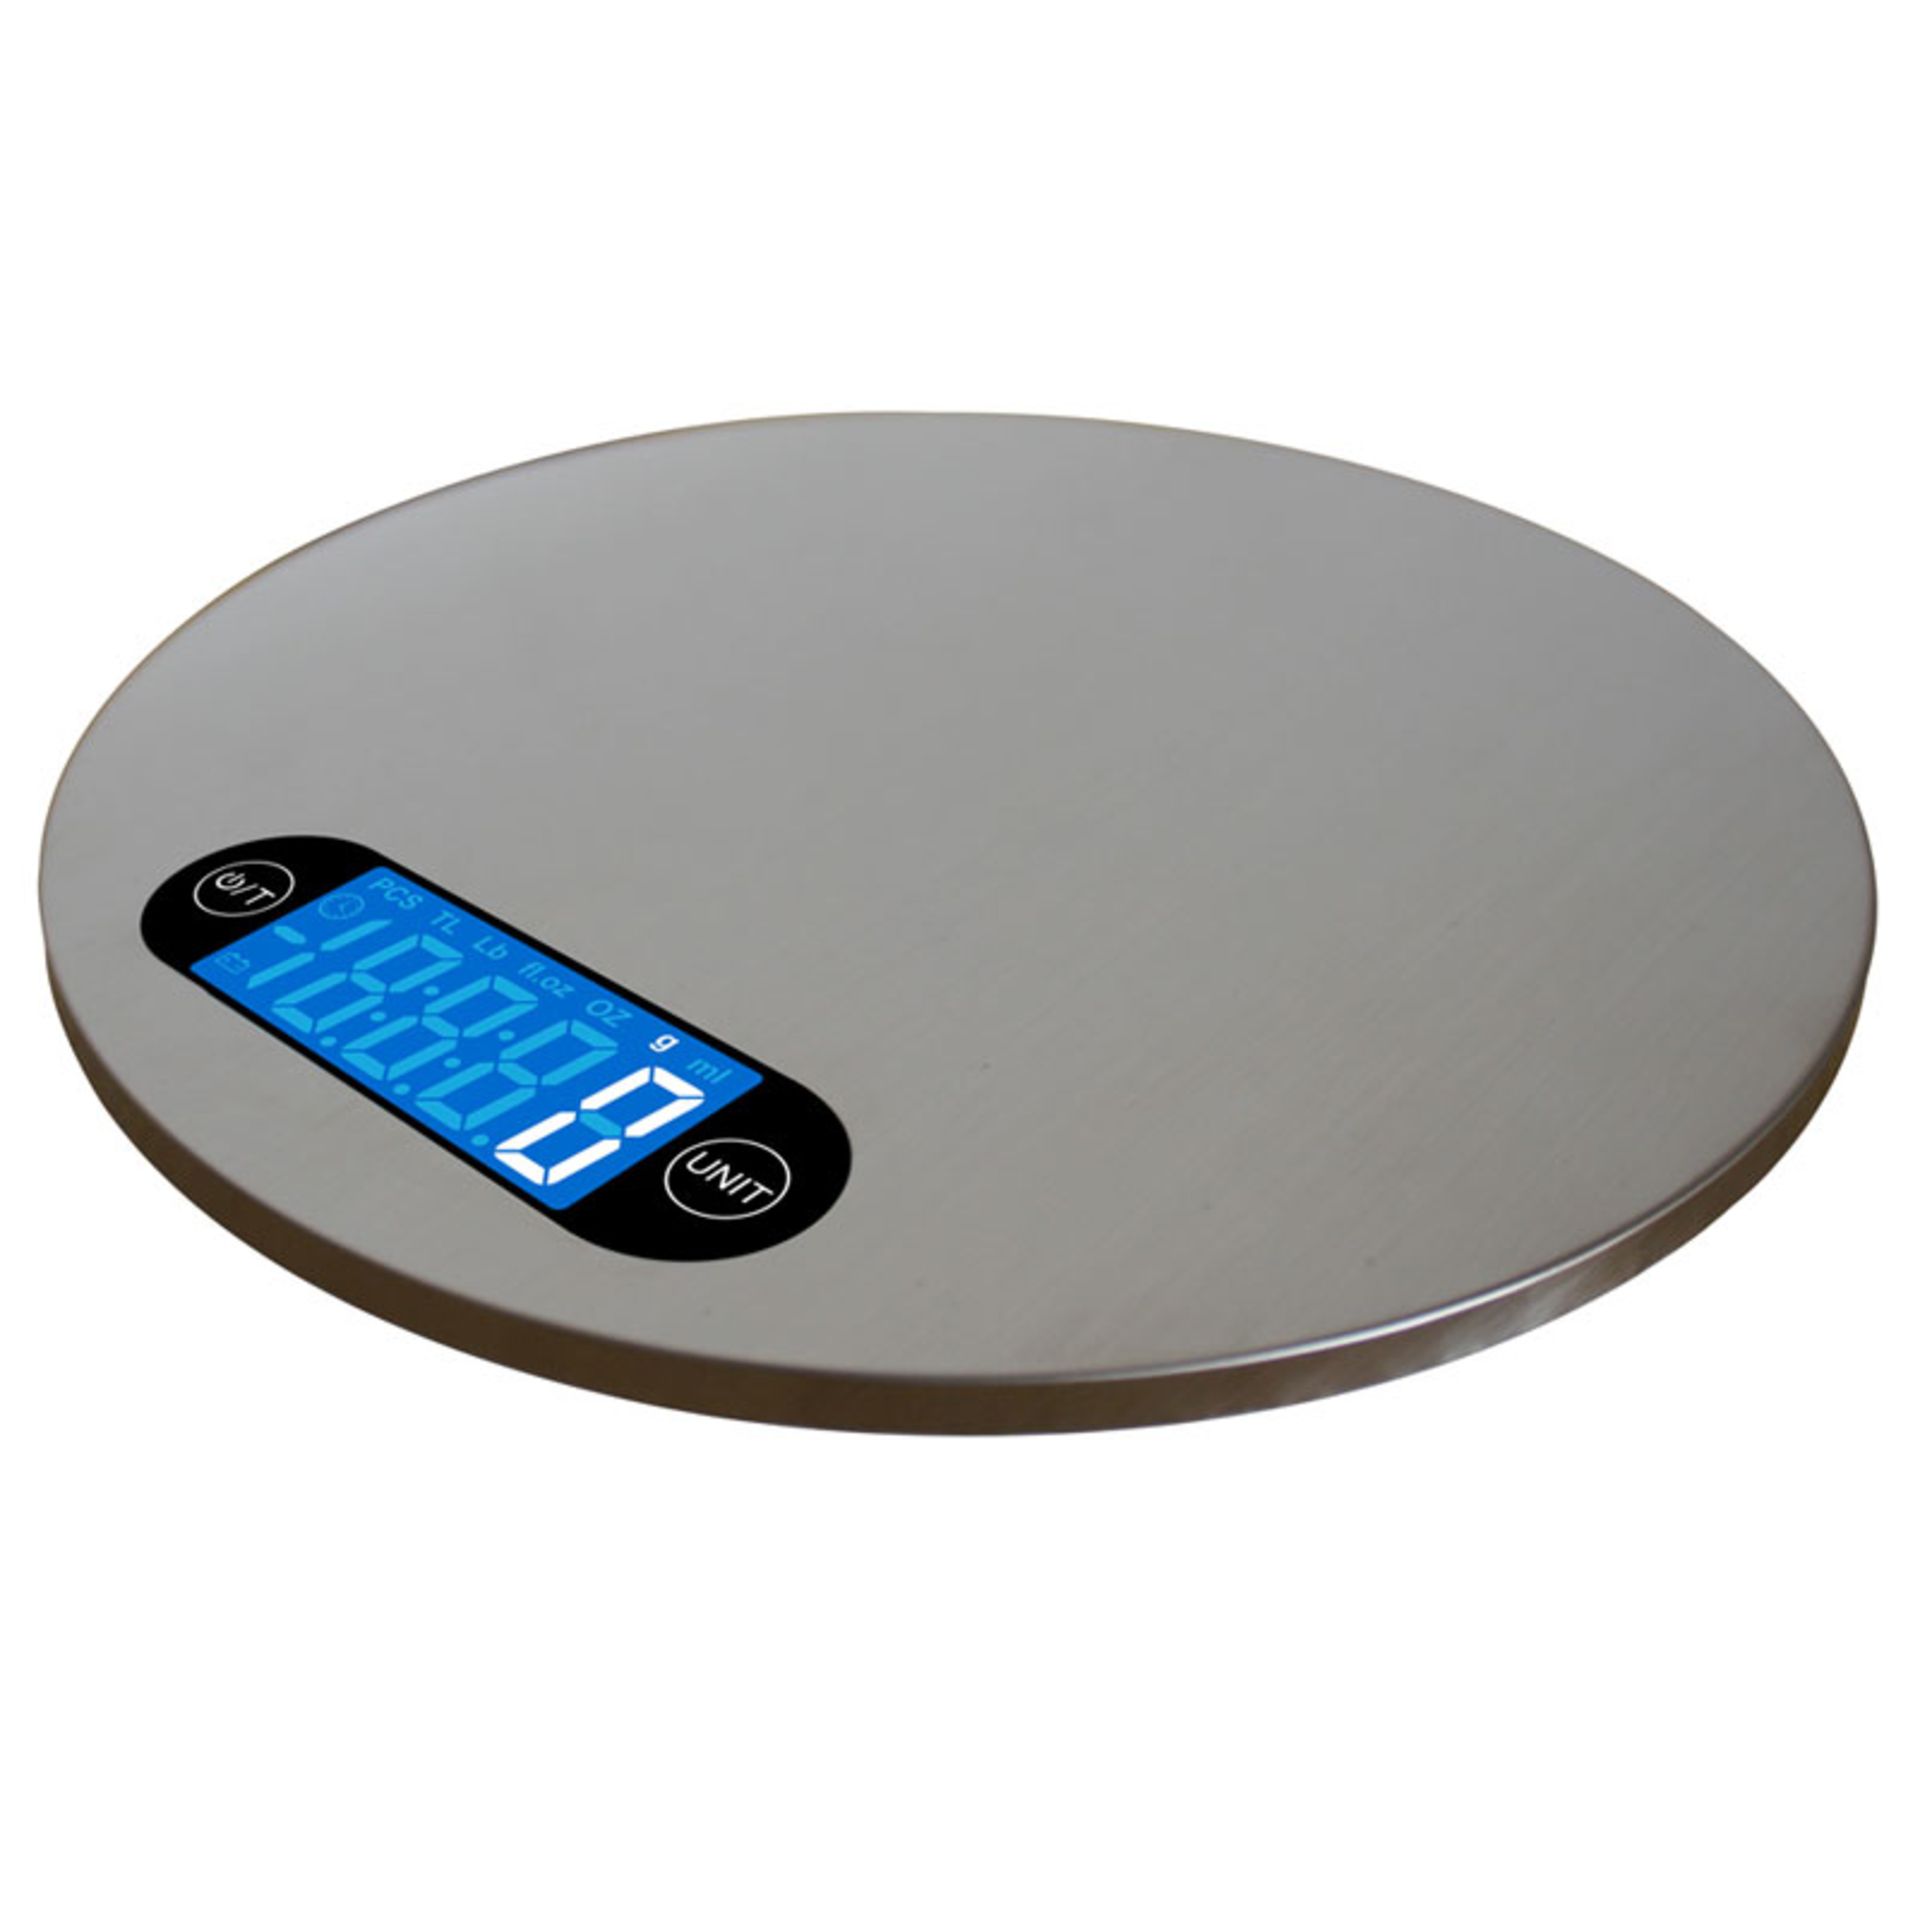 V Brand New Digital Kitchen Scales With Large LCD Display In Ibs Ozs & Grams (Styles May Vary & - Image 4 of 4